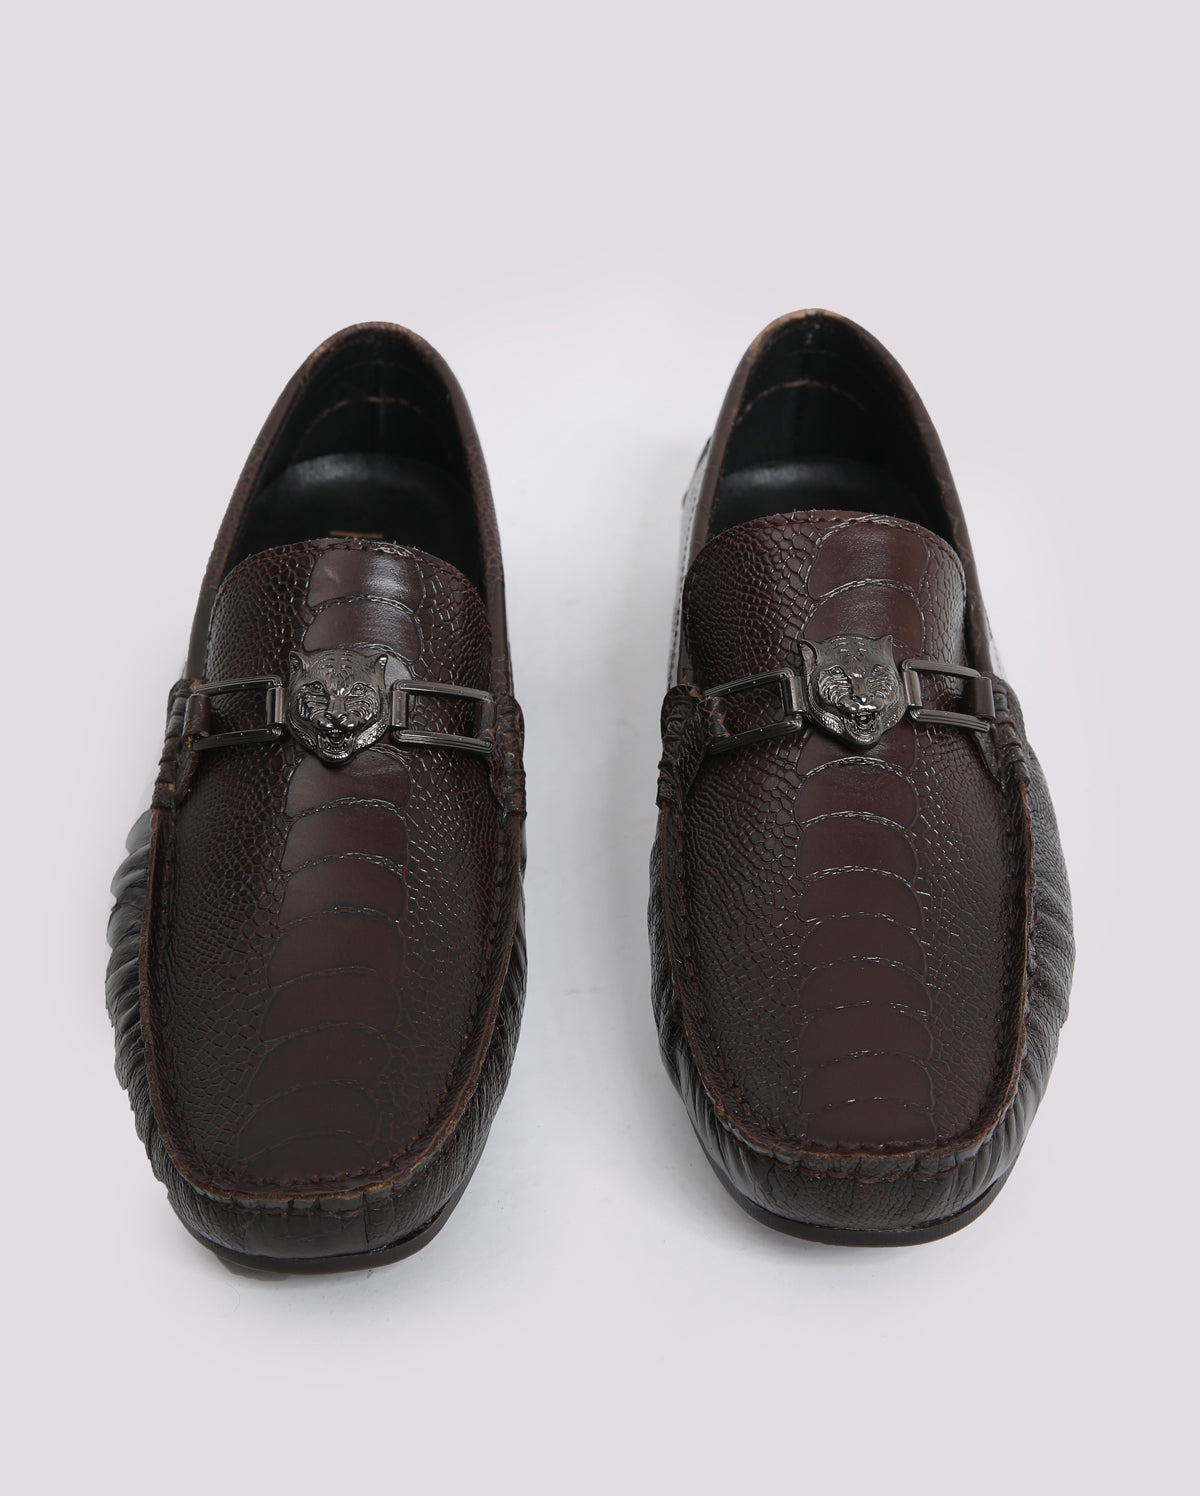 TEXTURED LOAFER WITH BUCKLE